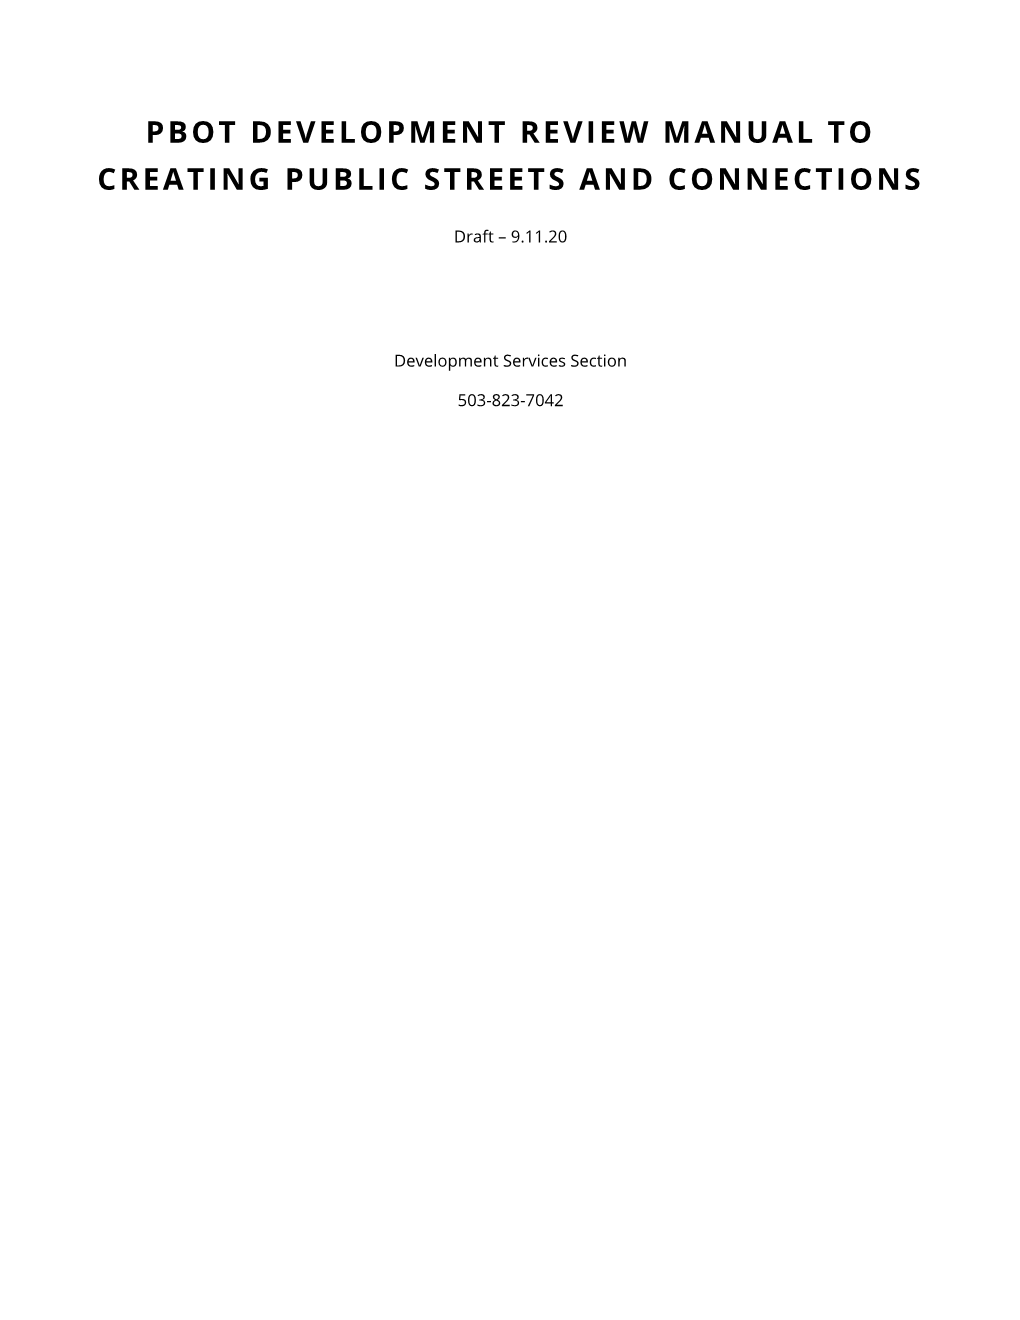 Pbot Development Review Manual to Creating Public Streets and Connections